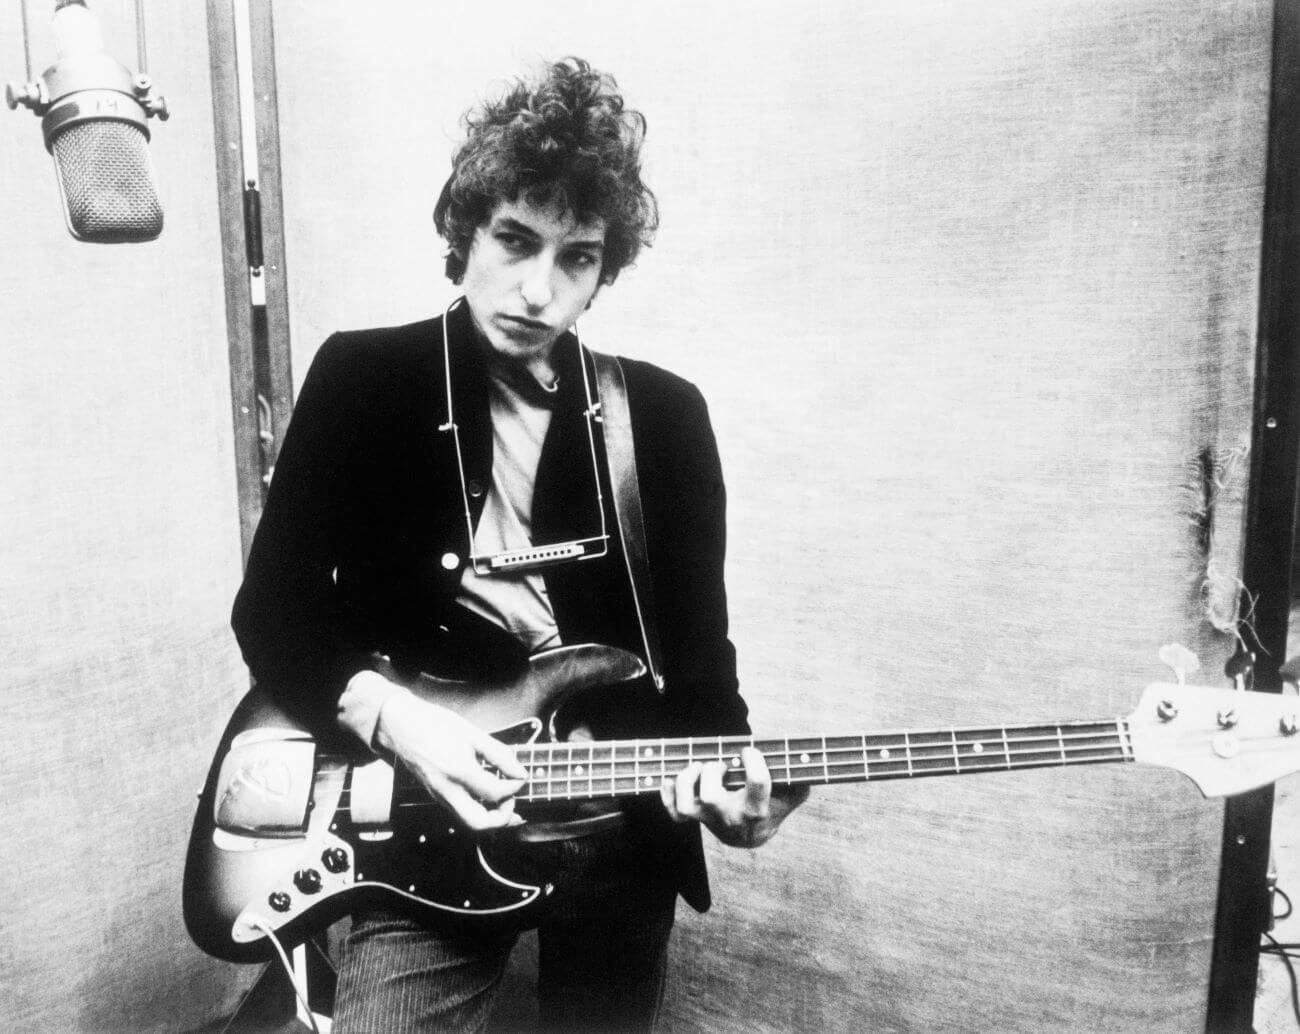 A black and white picture of Bob Dylan holding an electric guitar.